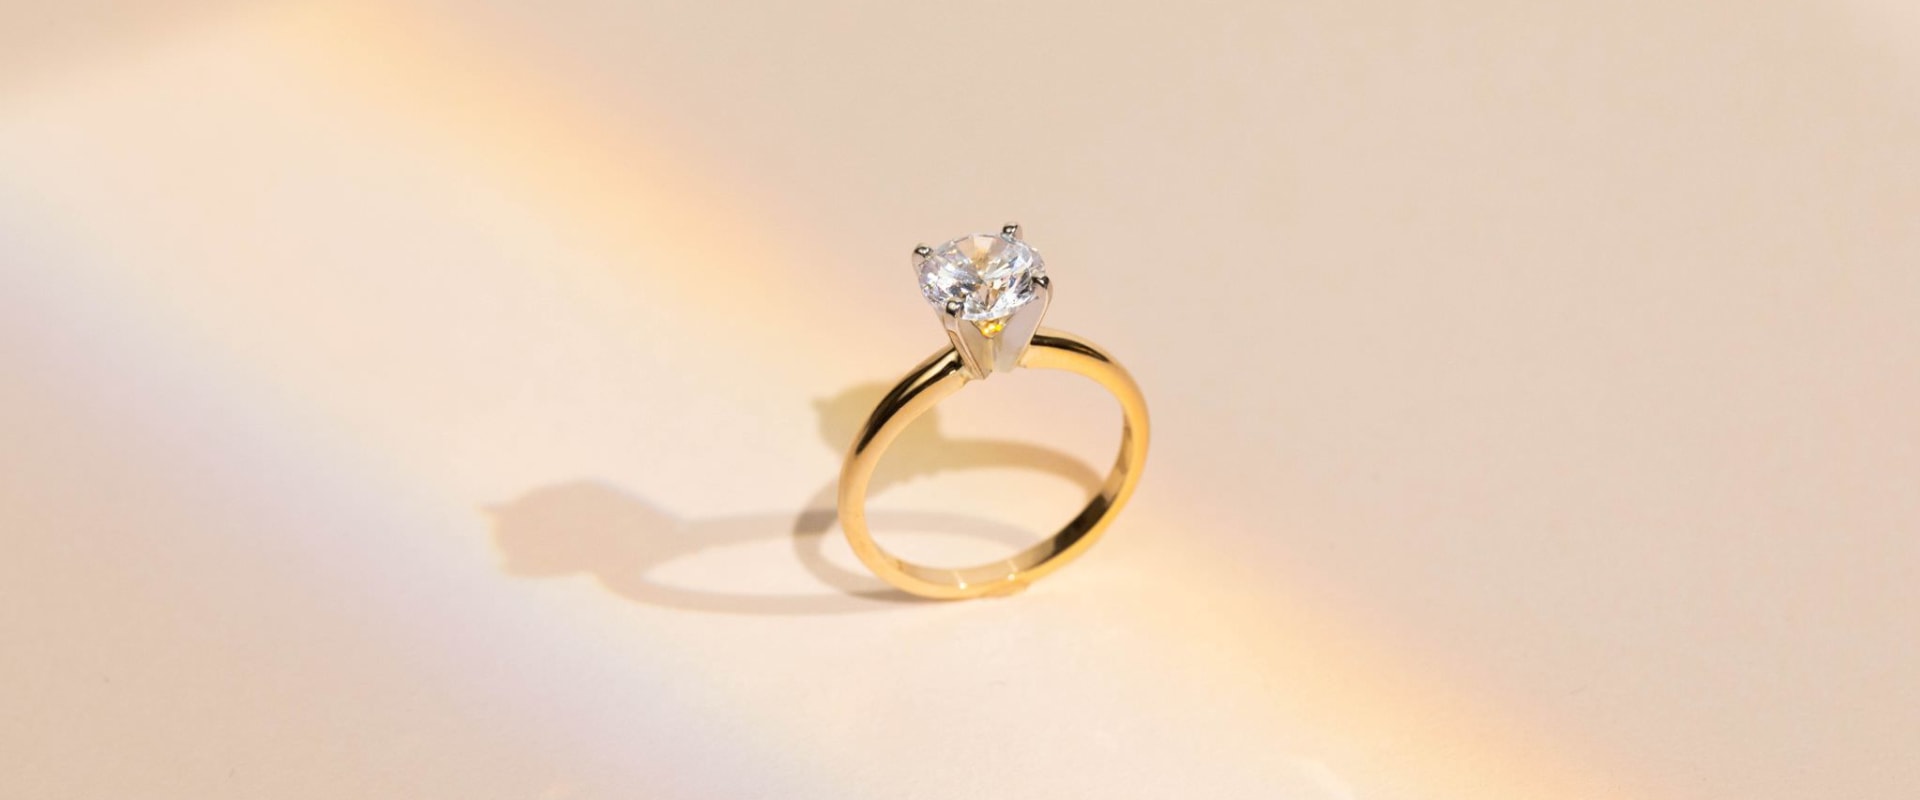 What kind of lens do you use for jewelry photography?